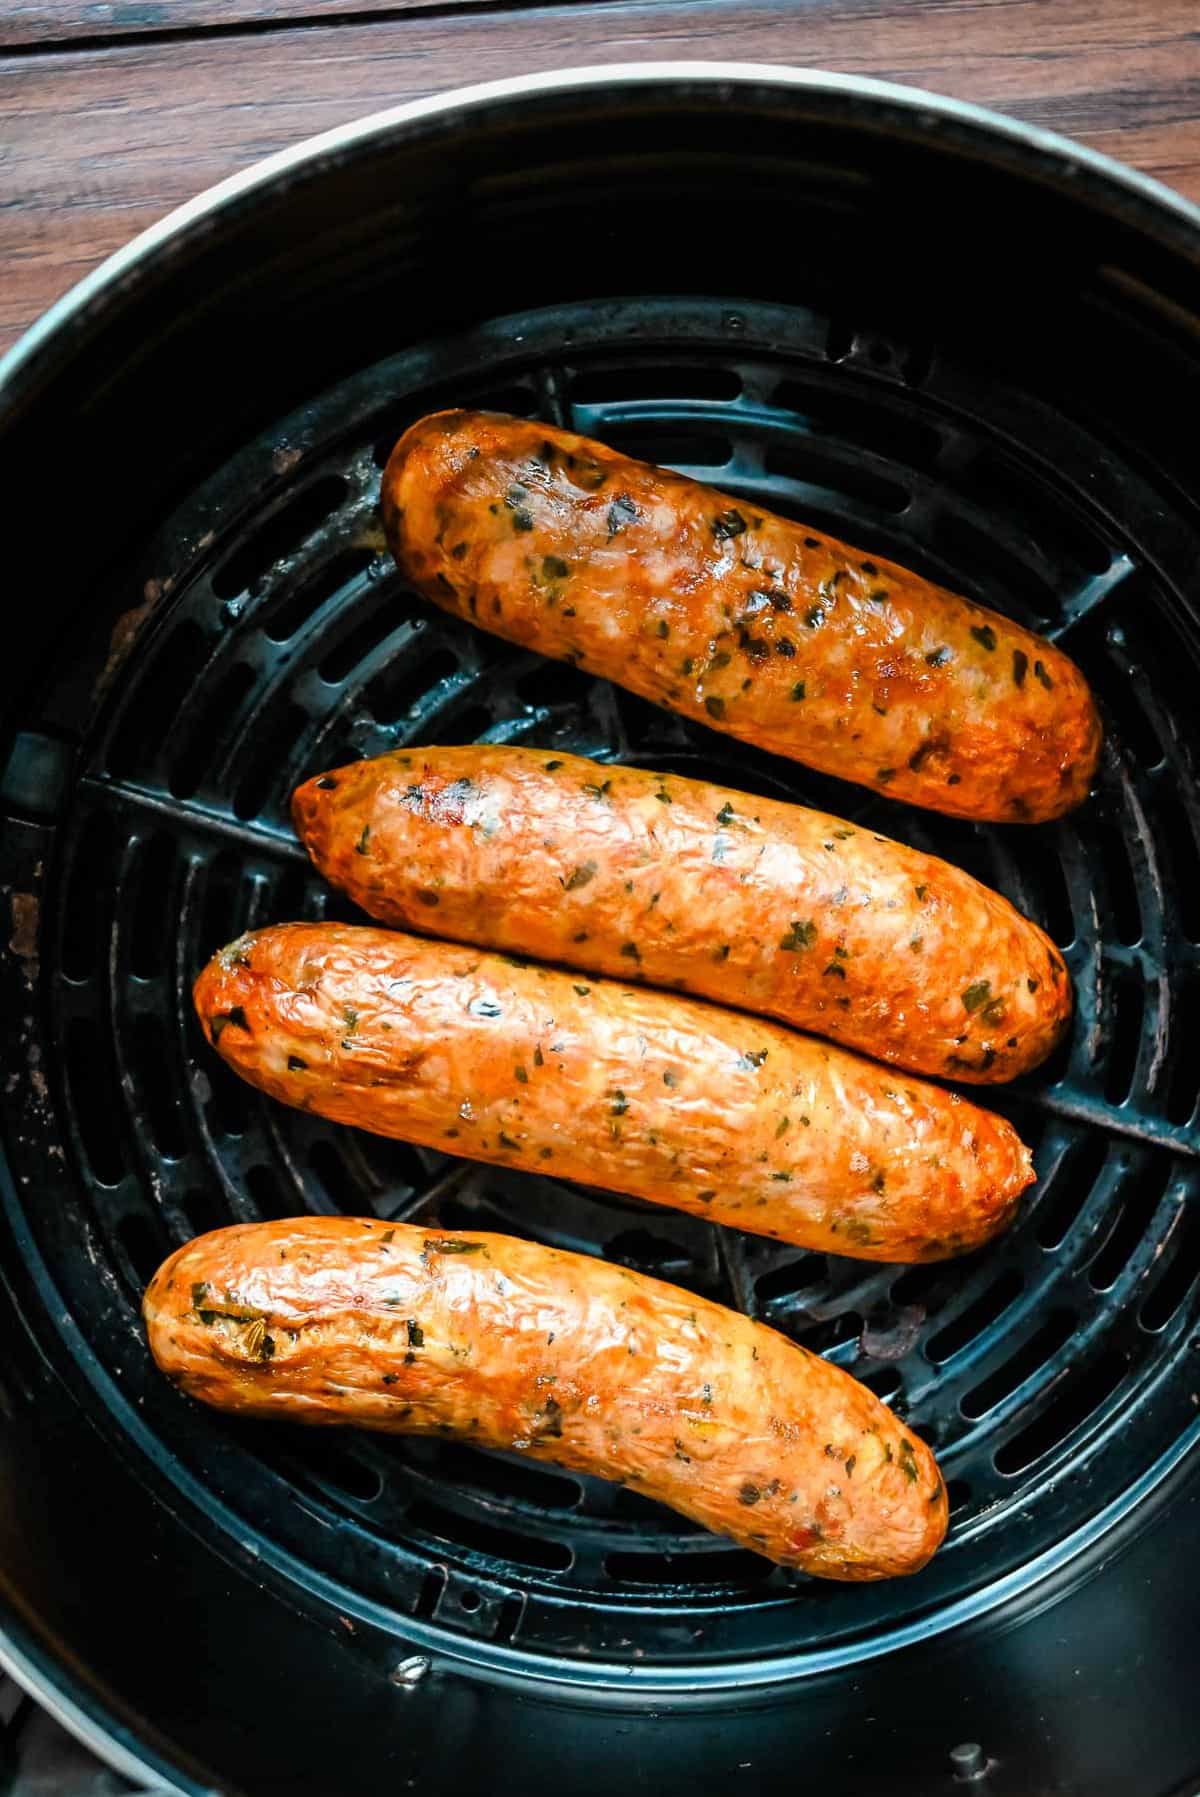 cooked italian chicken sausage in the air fryer.